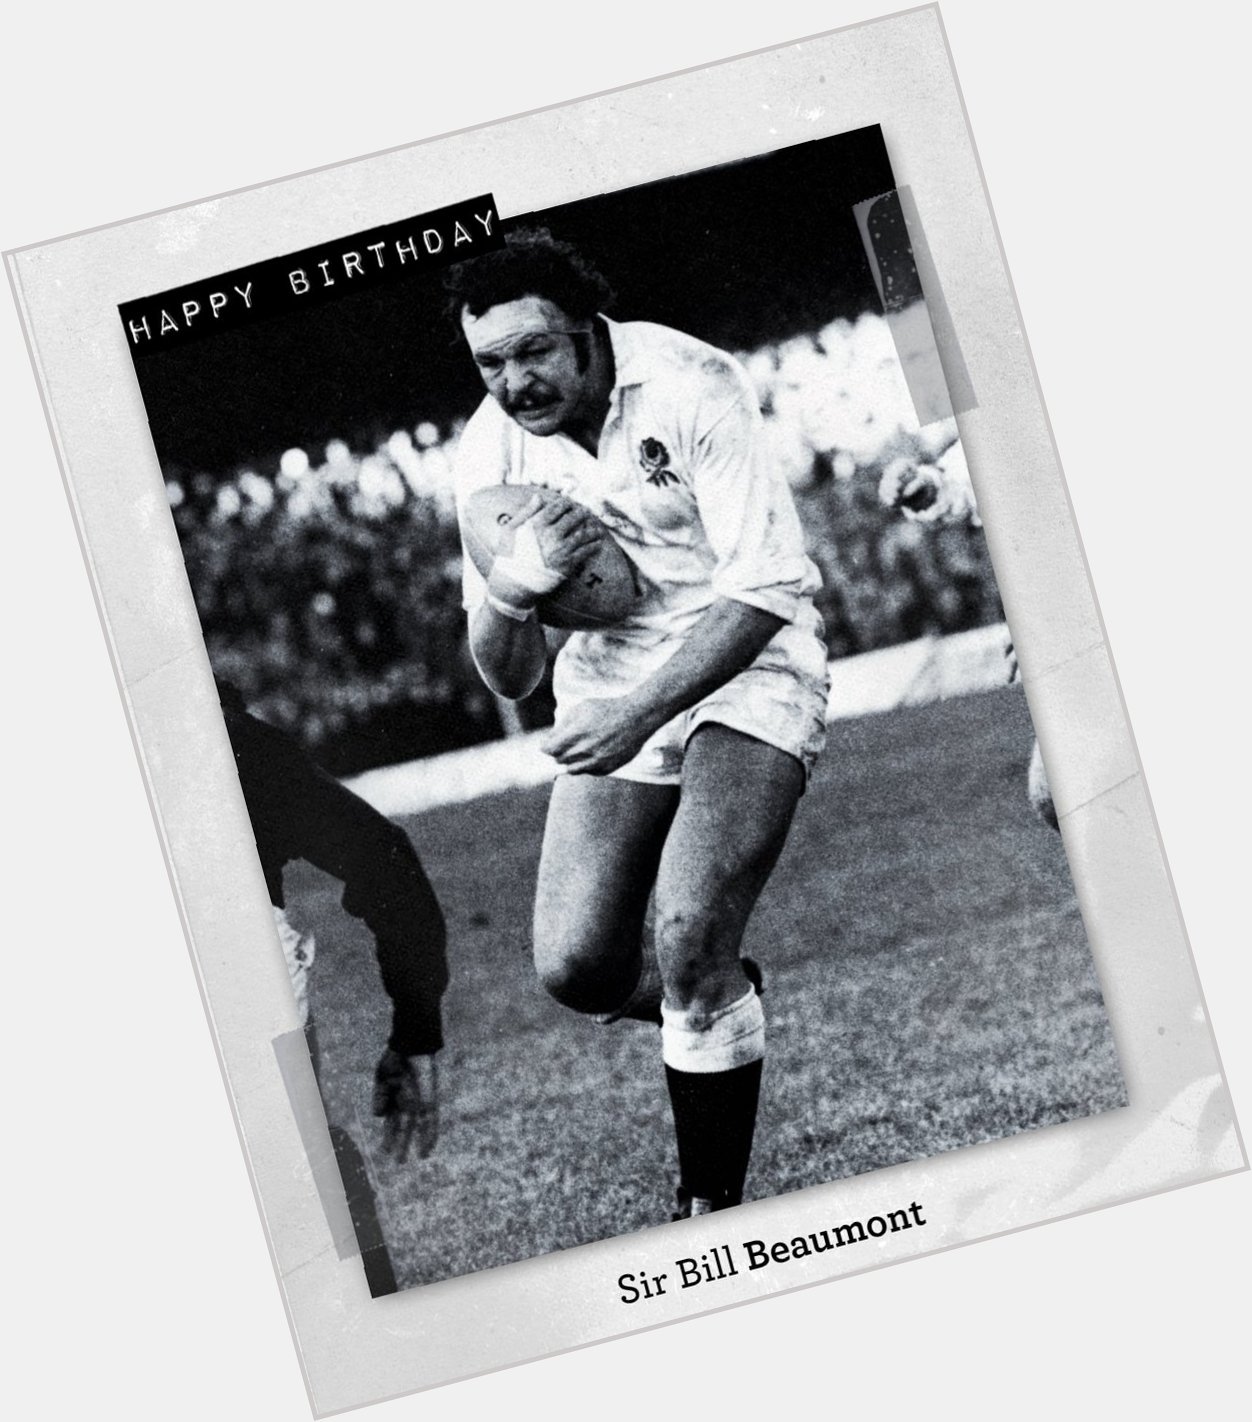 Happy birthday to our former captain and chairman Sir Bill Beaumont 